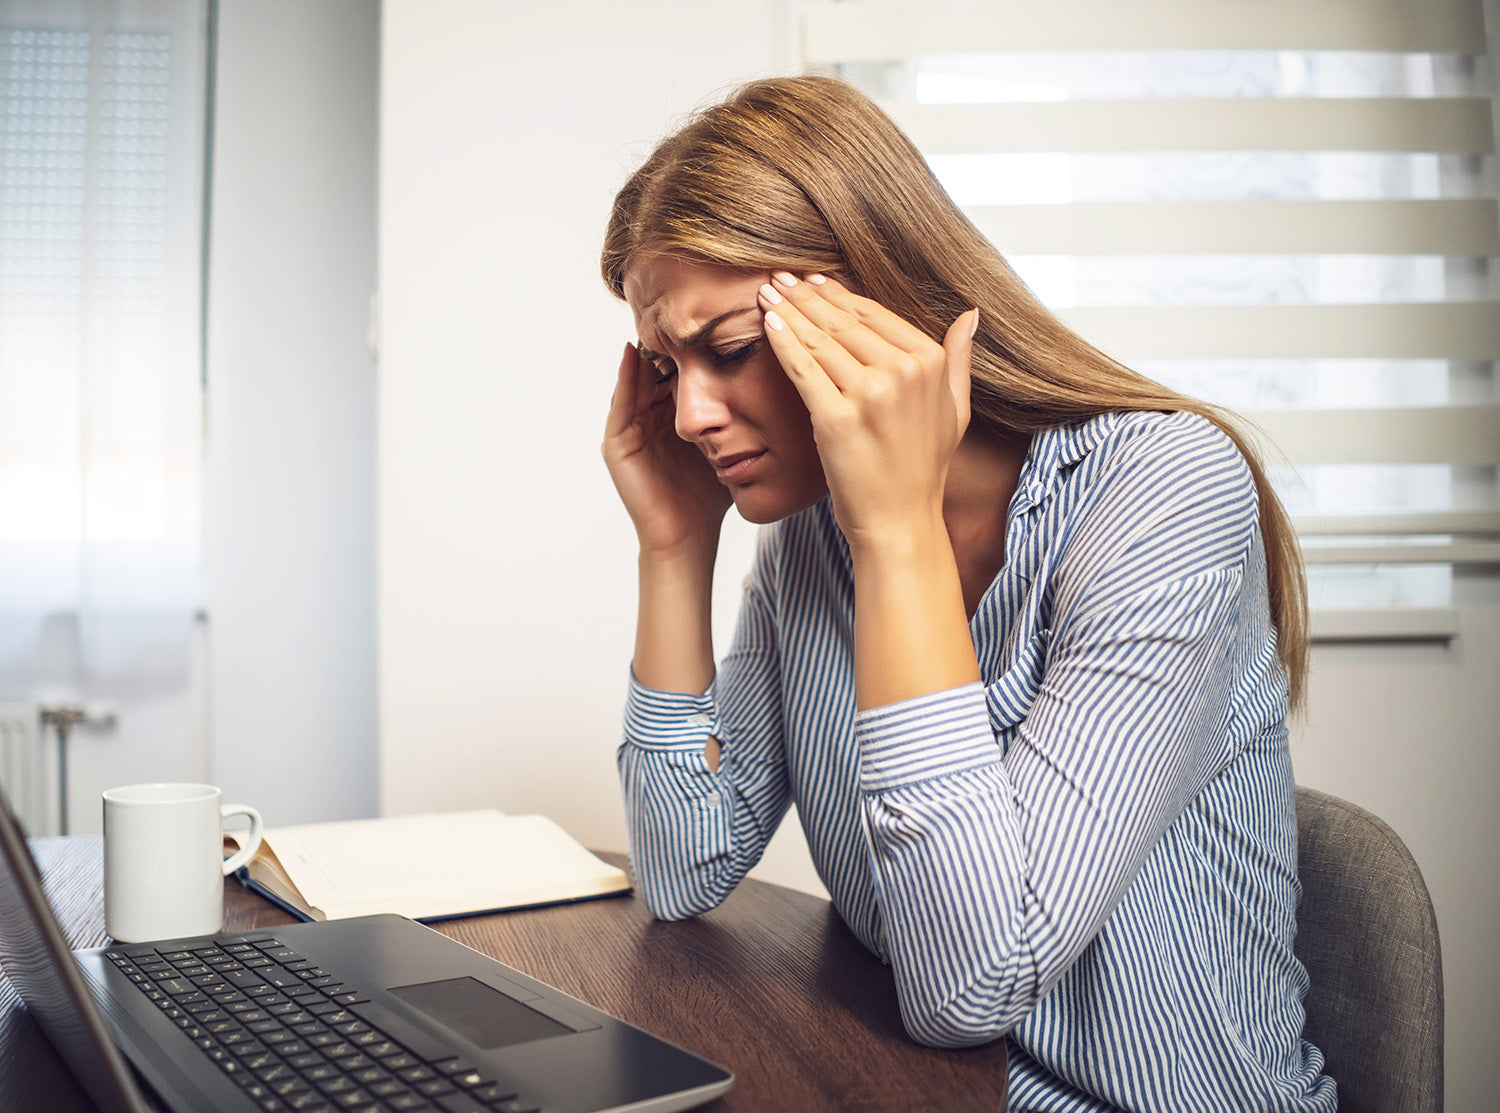 Woman looking stressed